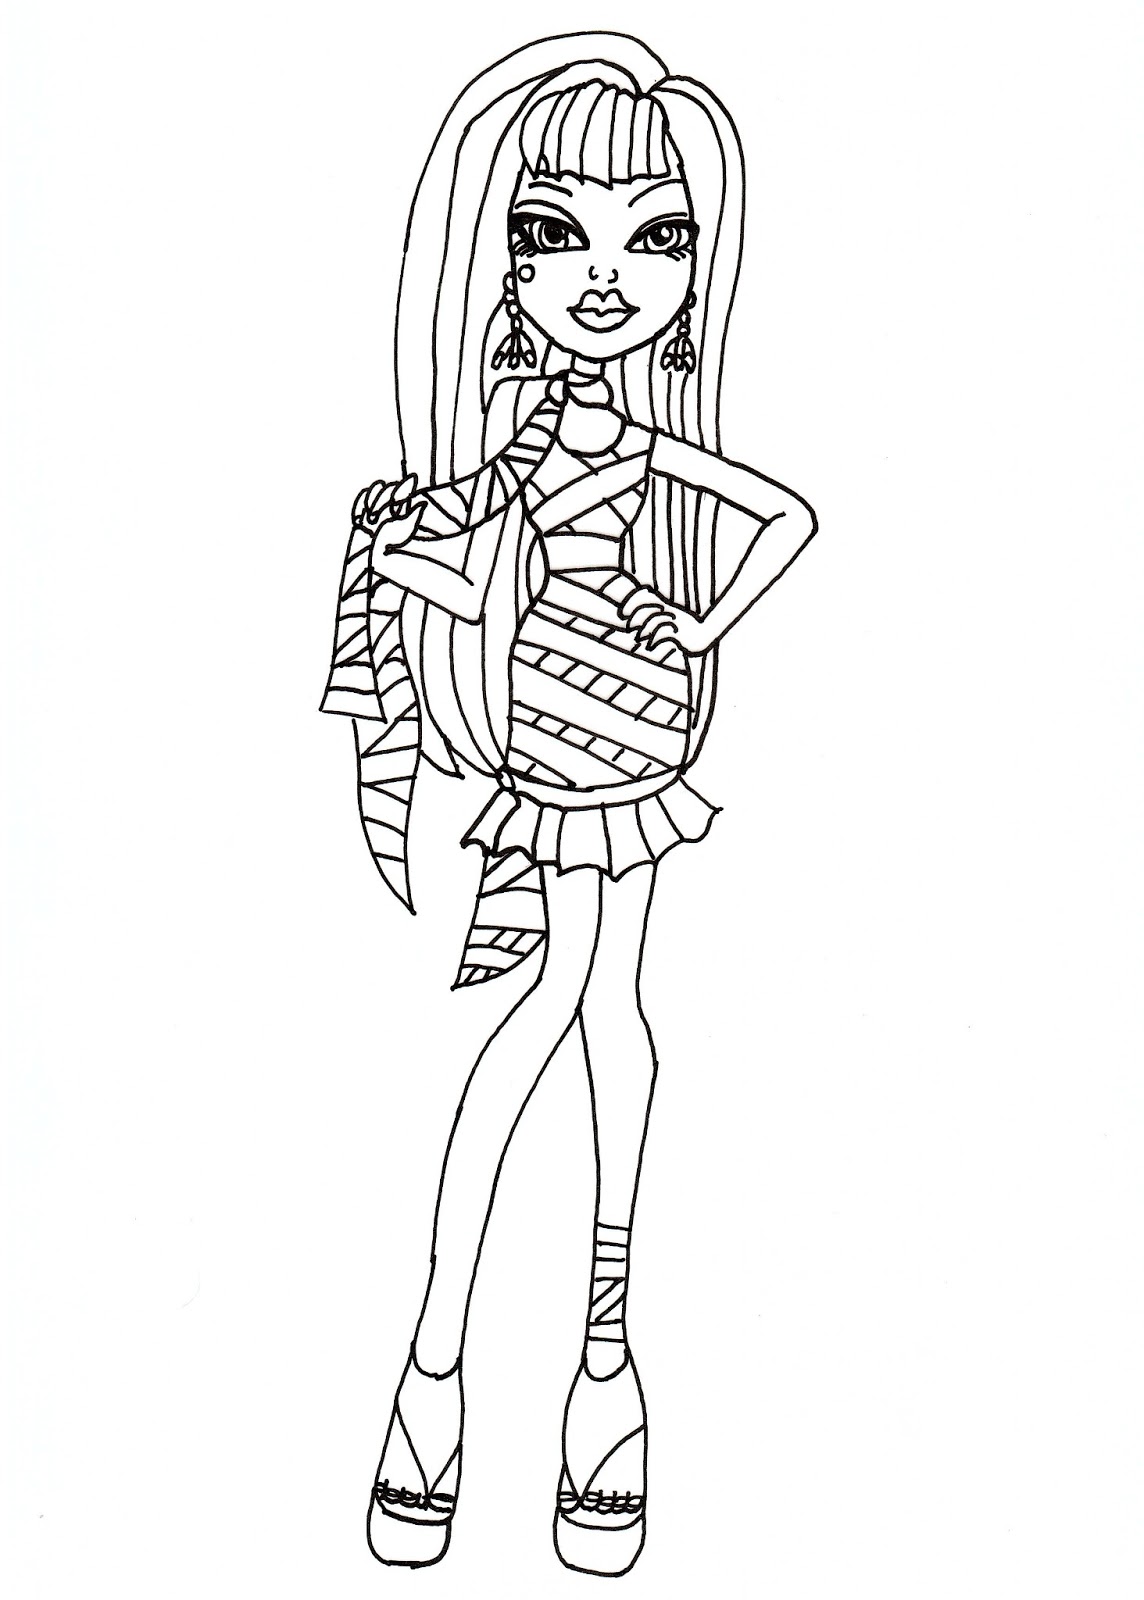 Free Printable Monster High Coloring Pages: Cleo Scaris Coloring Sheet